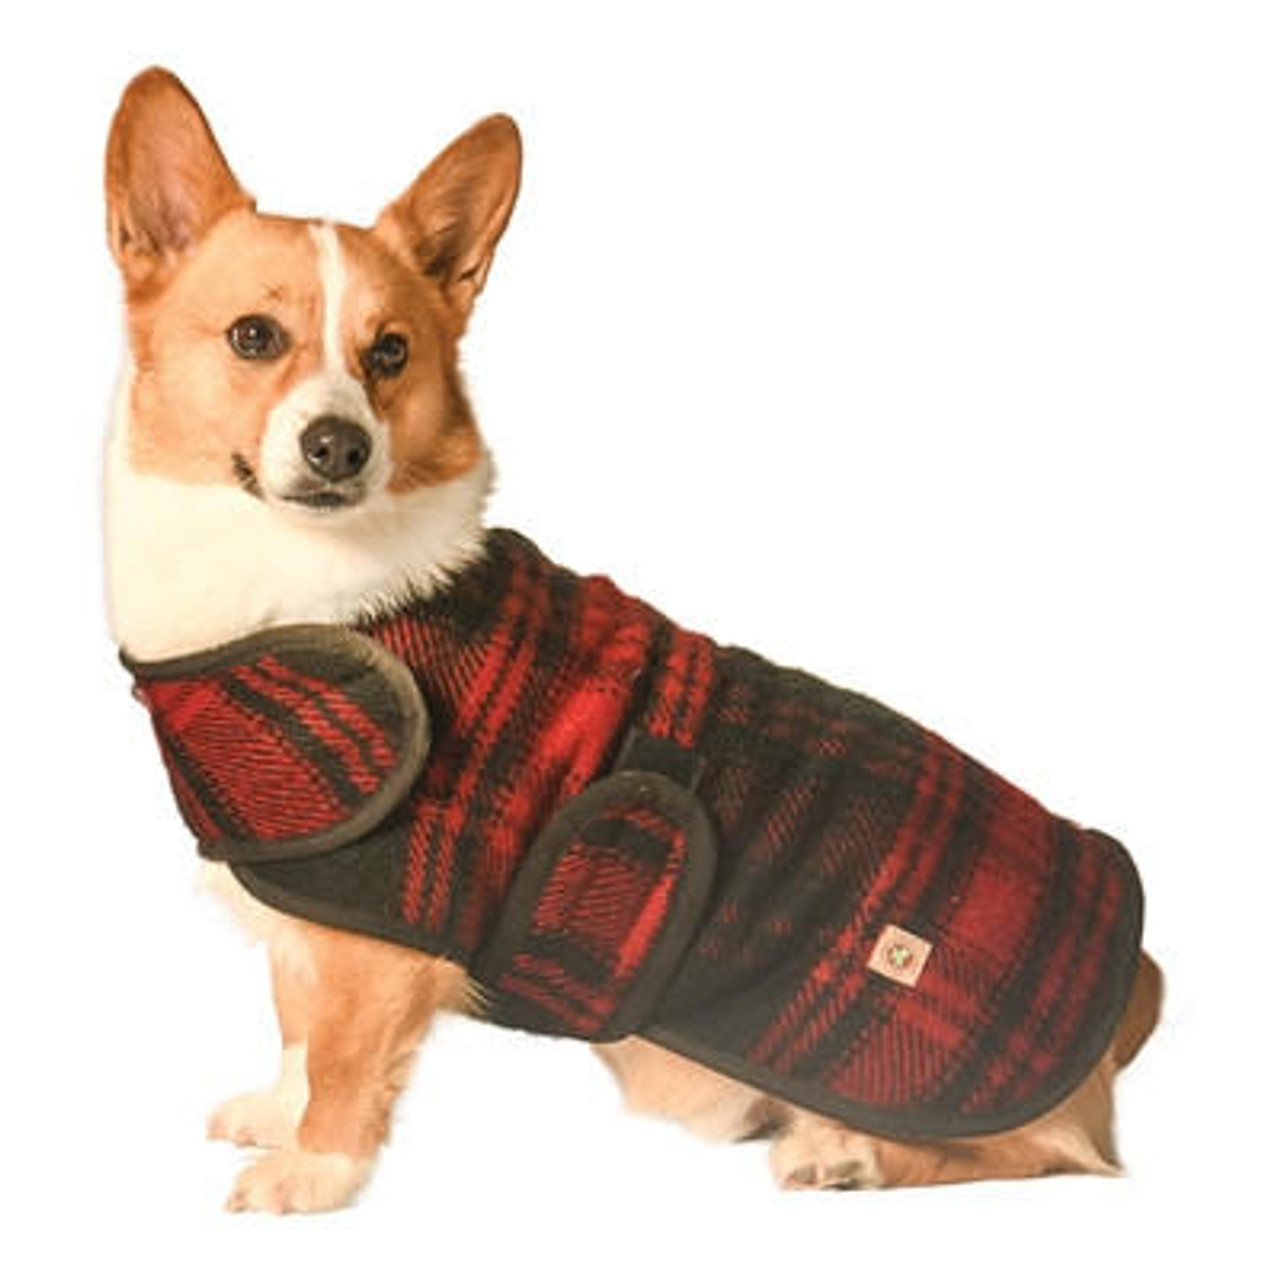 Red and Black Plaid Wool Blanket Dog Coat - The New York Dog Shop